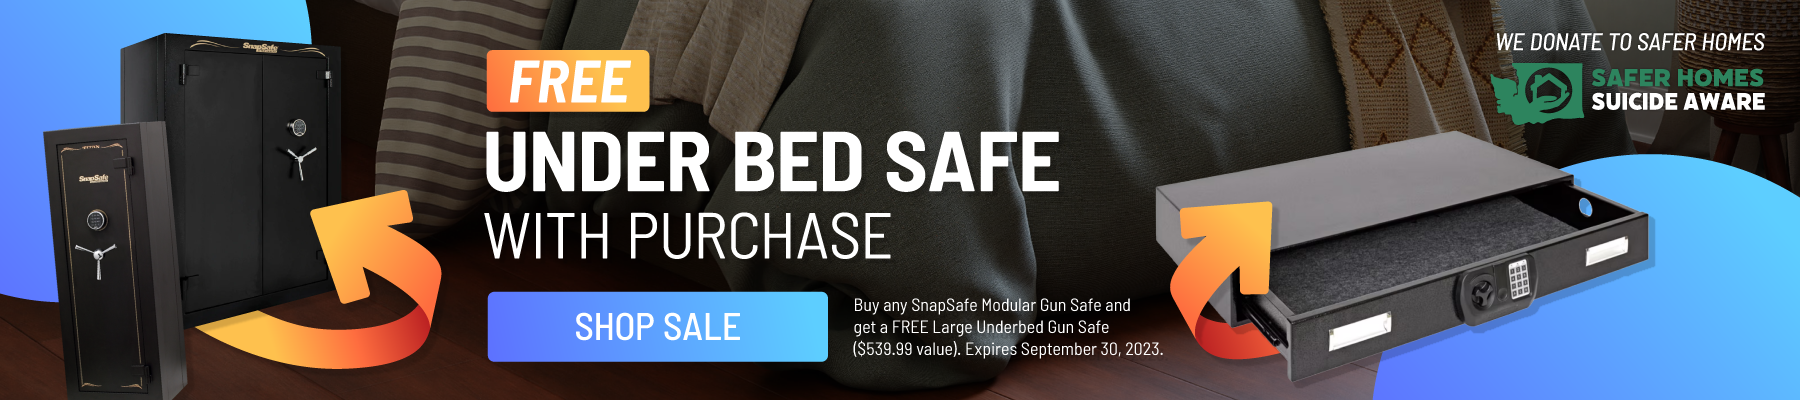 SnapSafe Free Under Bed Safe with Purchase